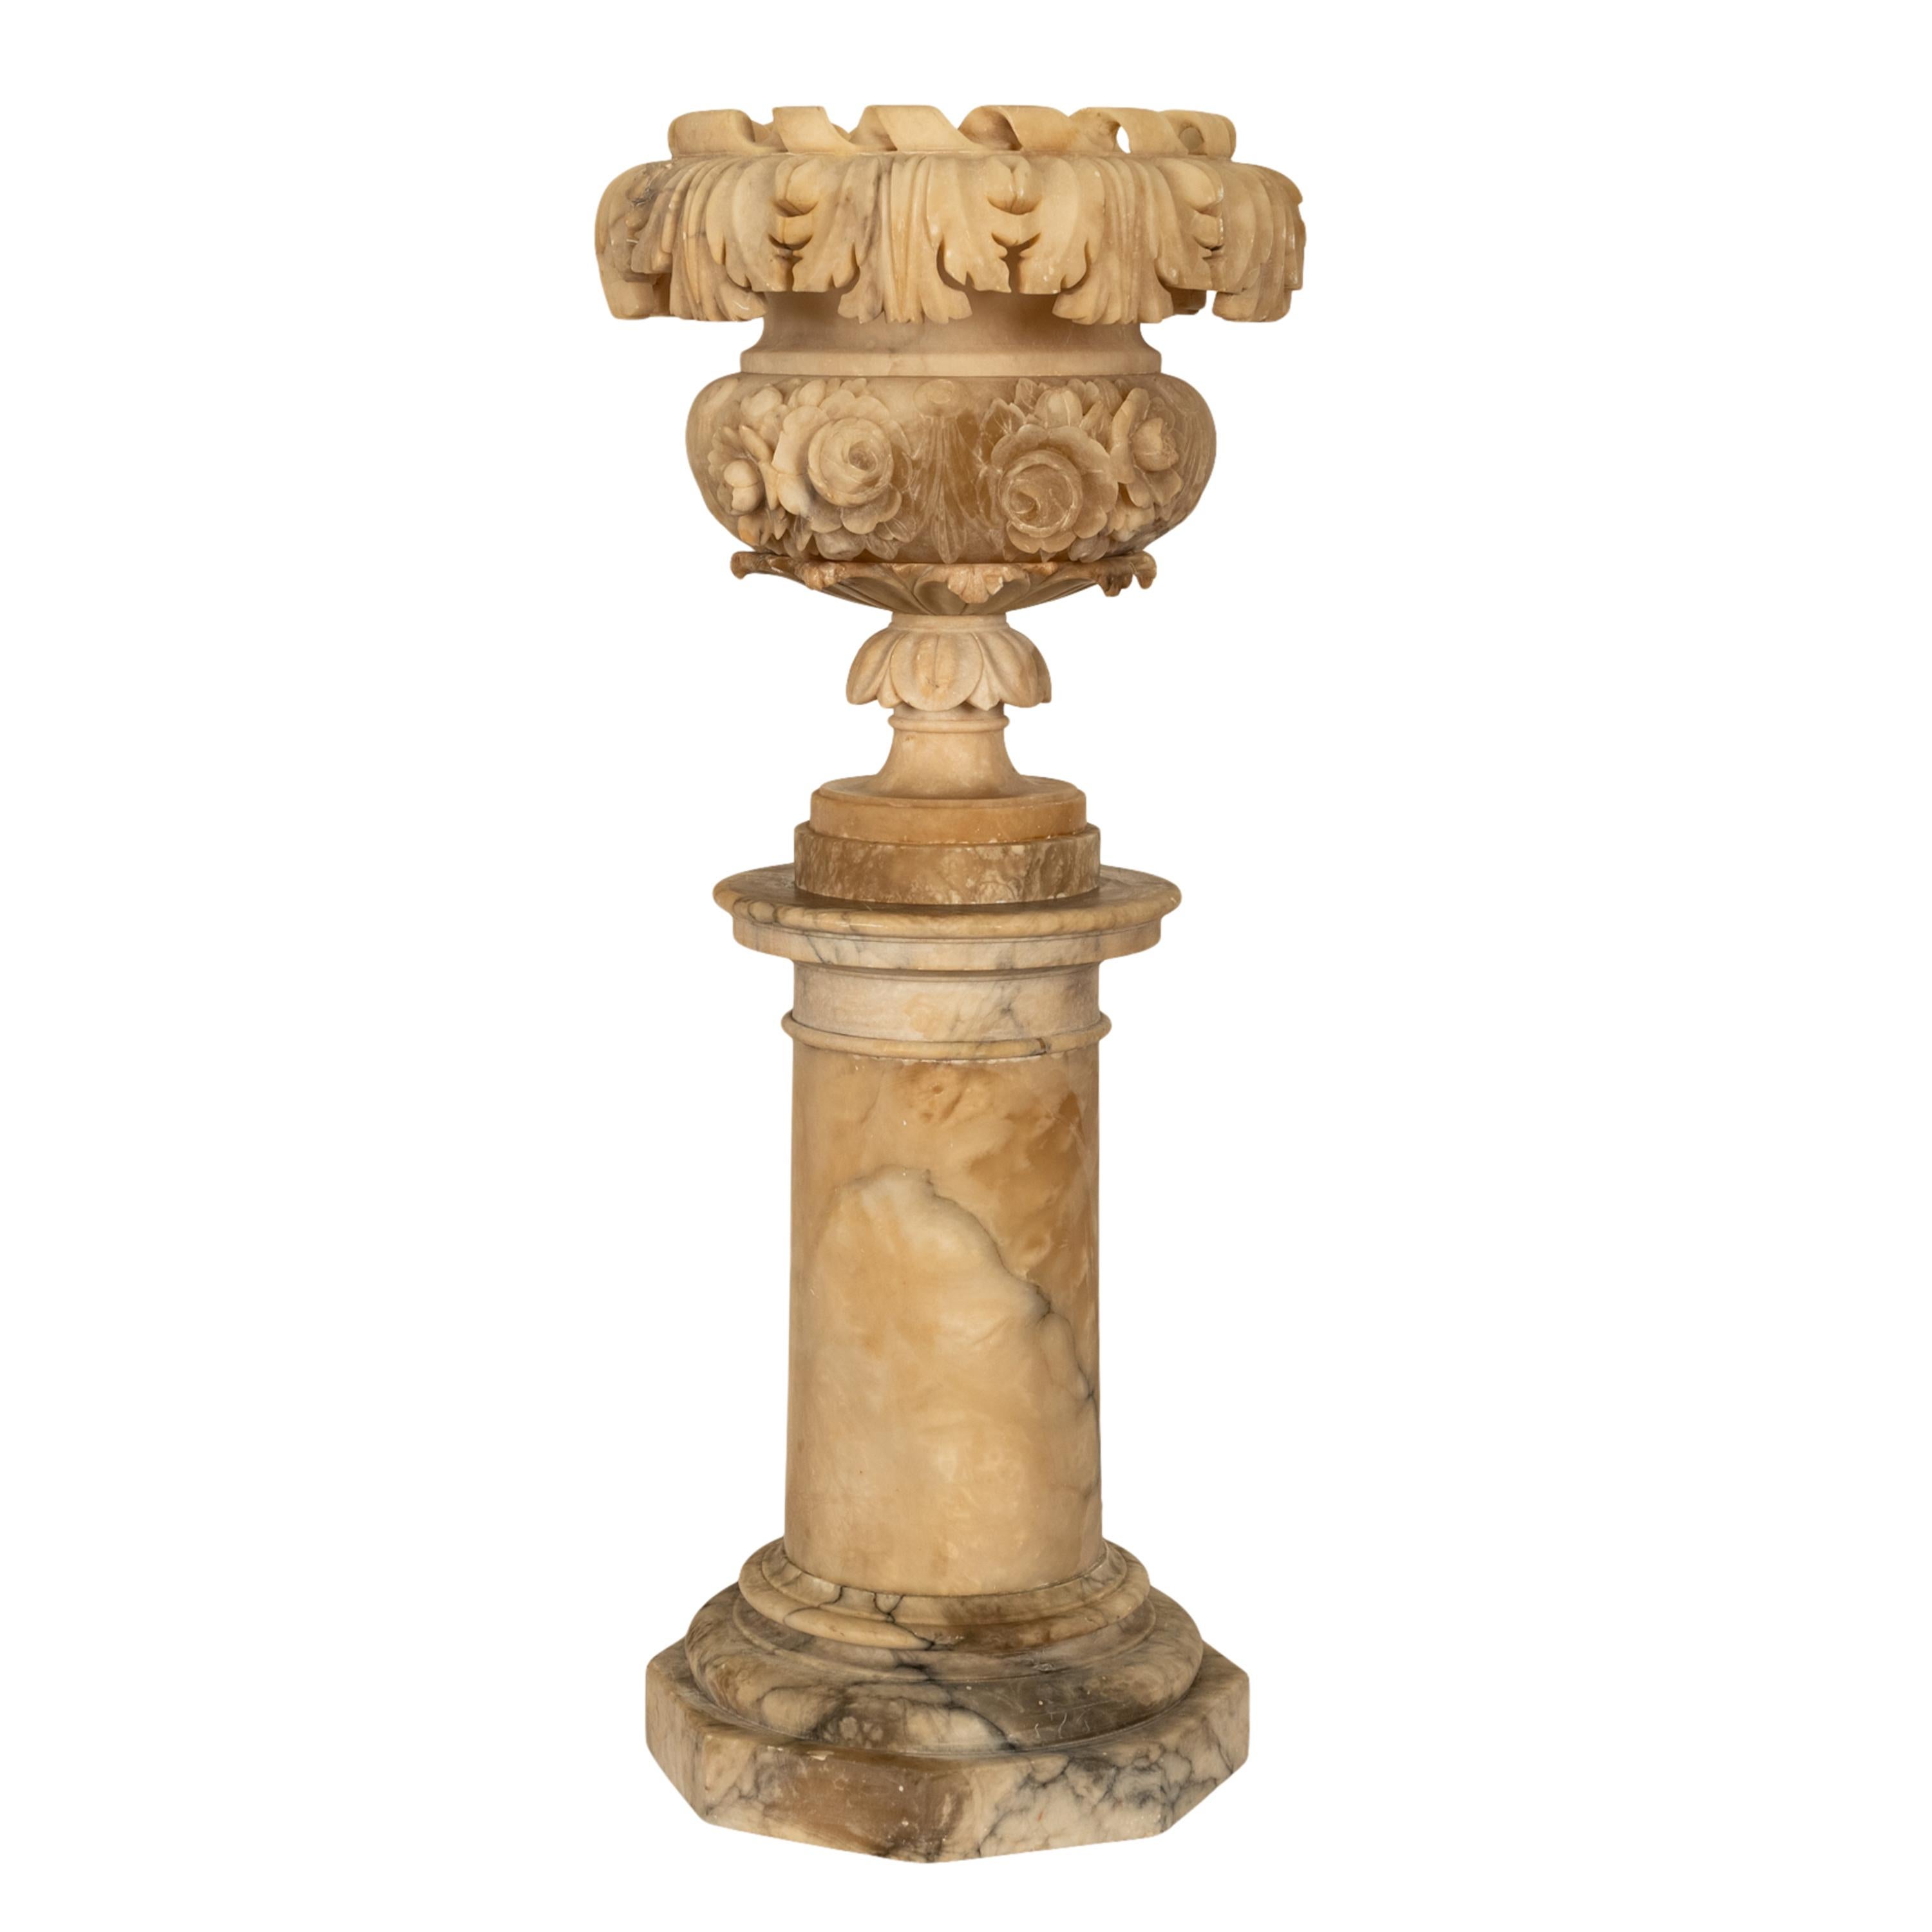 Antique 19th Century Italian Carved Alabaster Neoclassical Urn on Pedestal 1850 For Sale 2